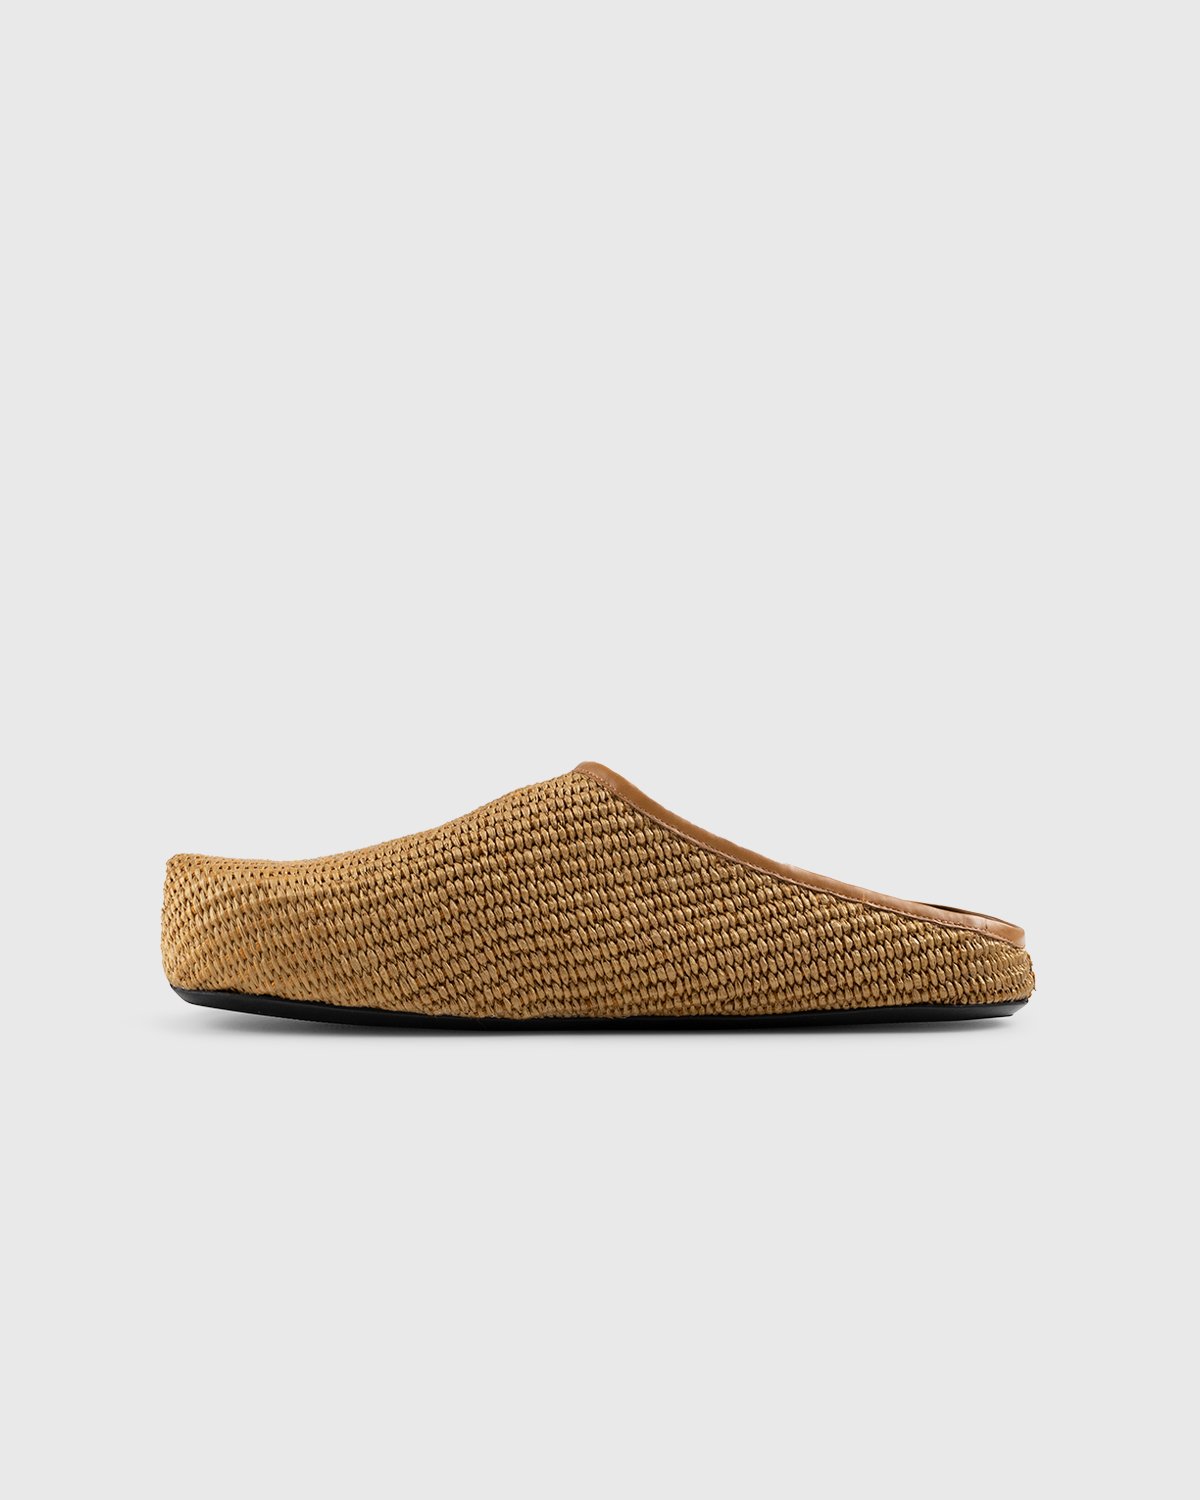 Marni - Woven Raffia and Leather Mules Brown/Black - Footwear - Brown - Image 2